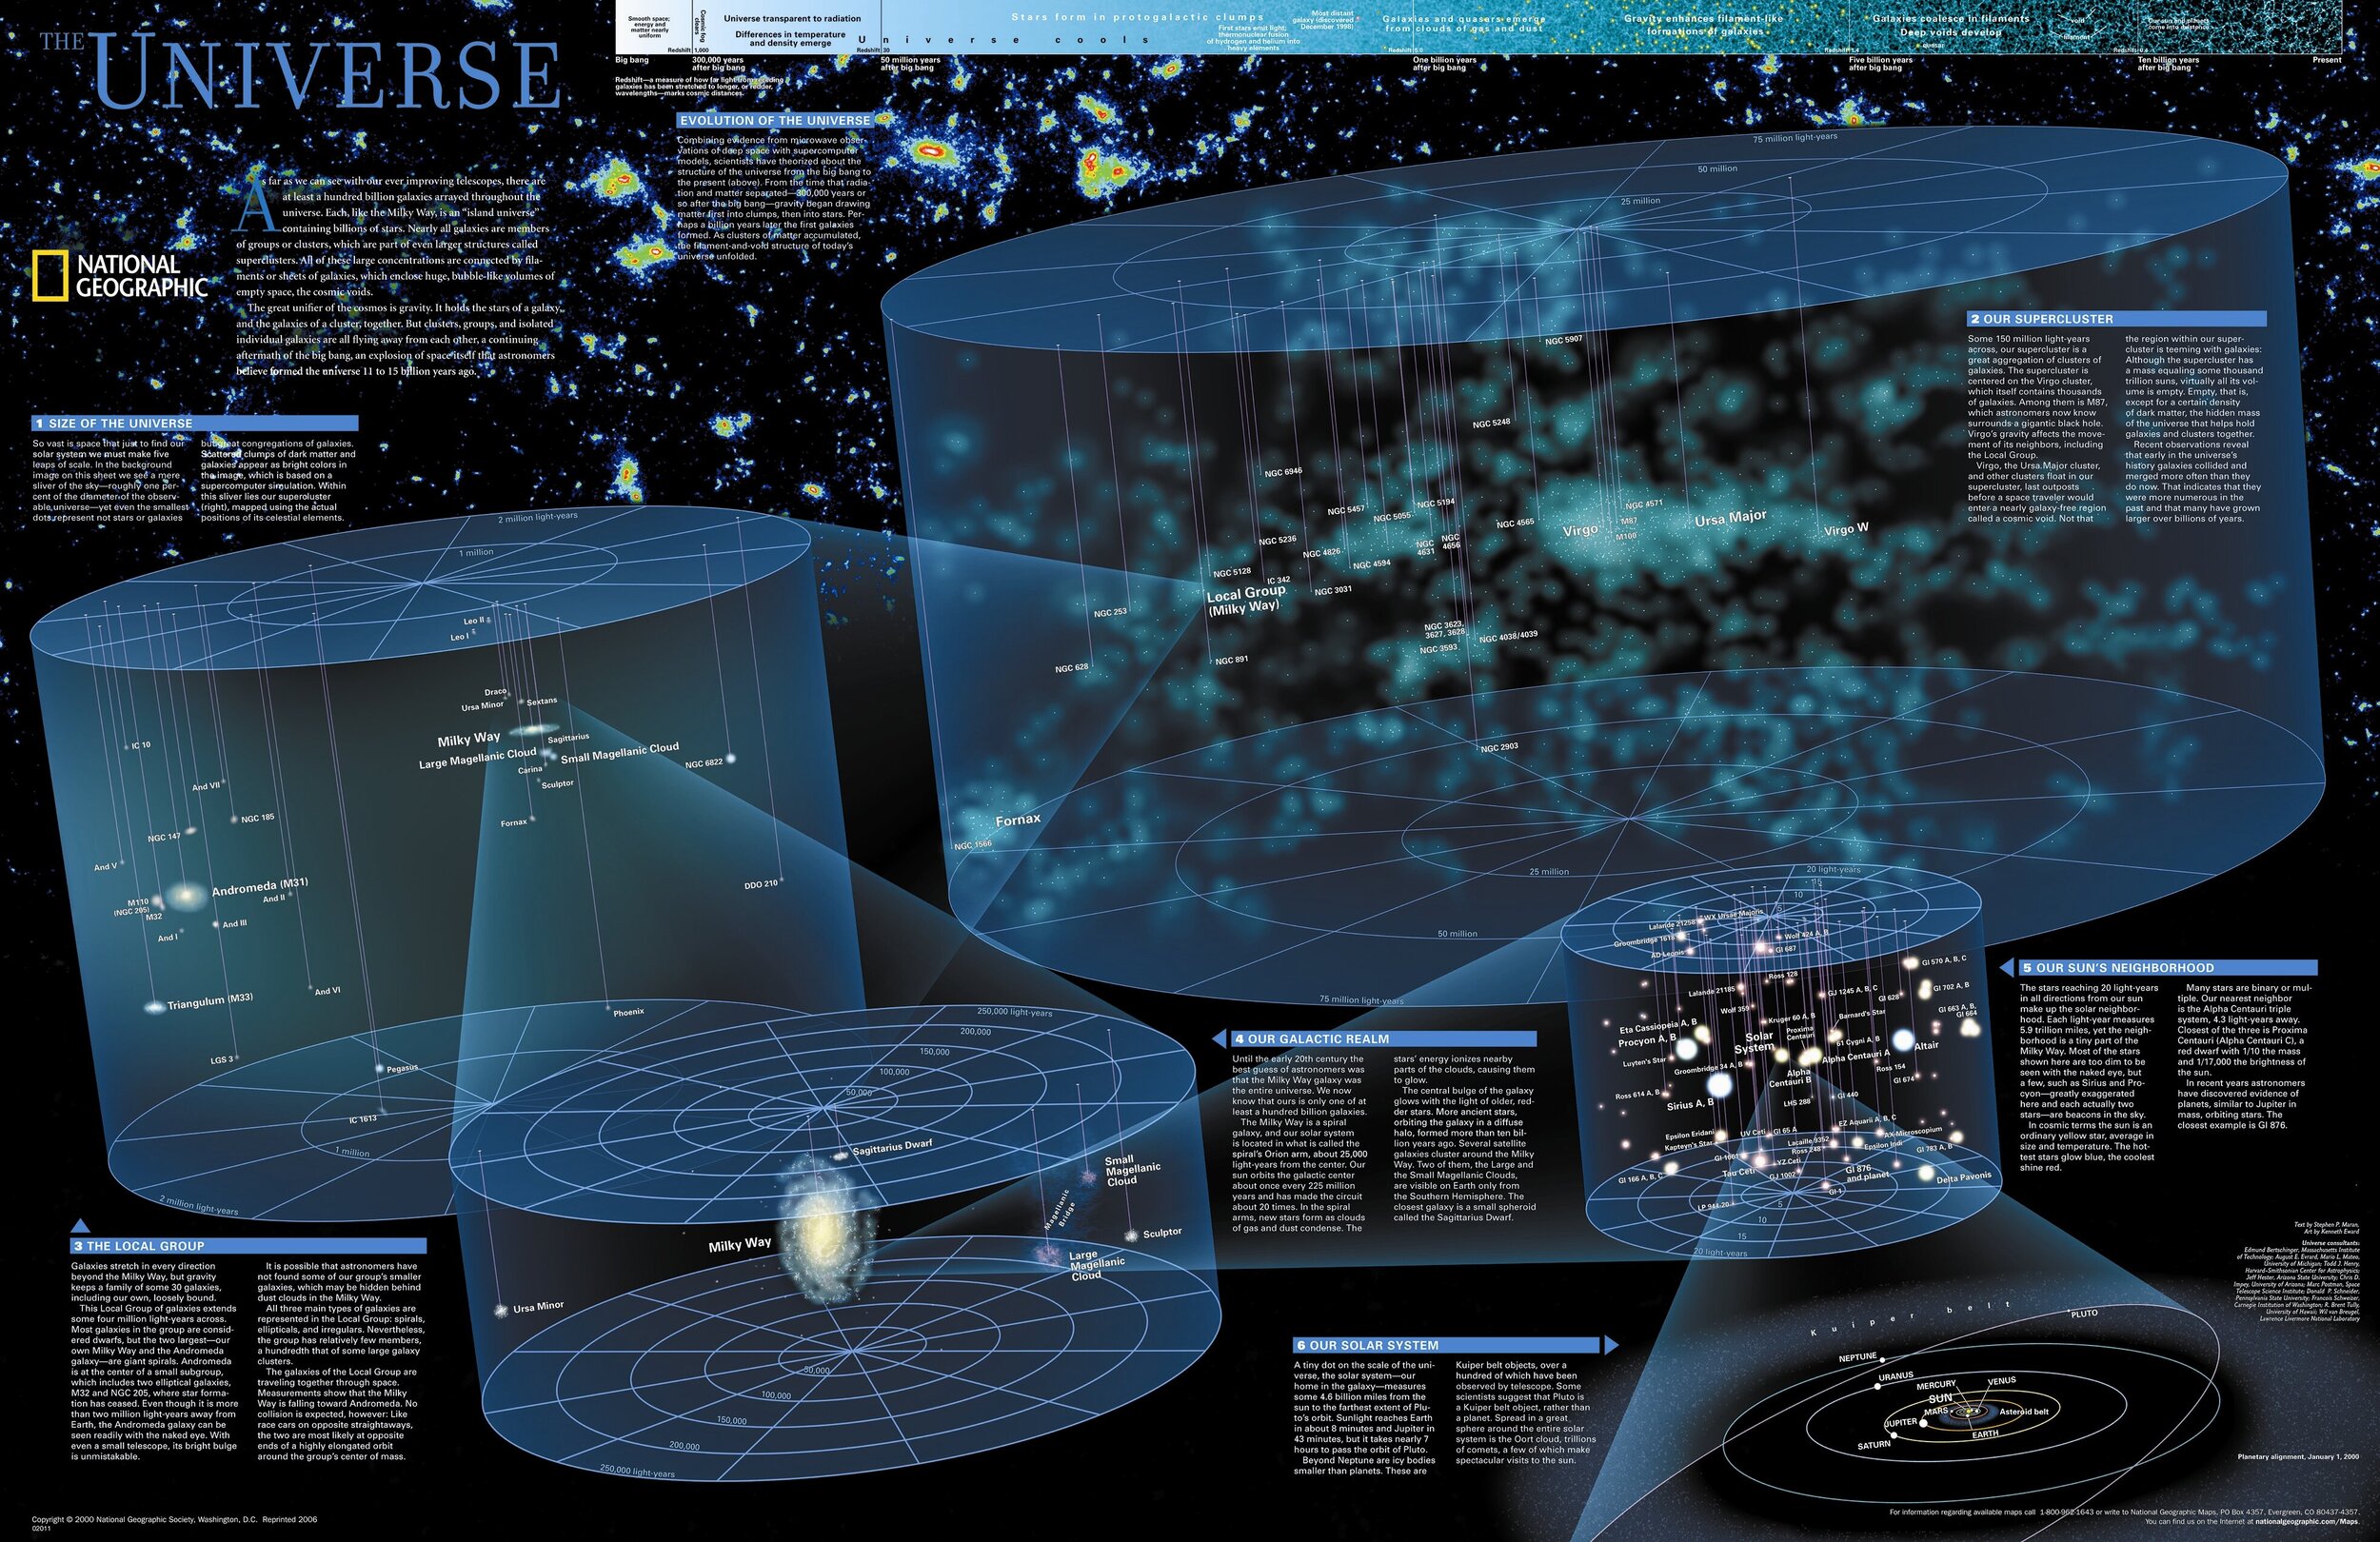 the-universe-poster-map.jpg